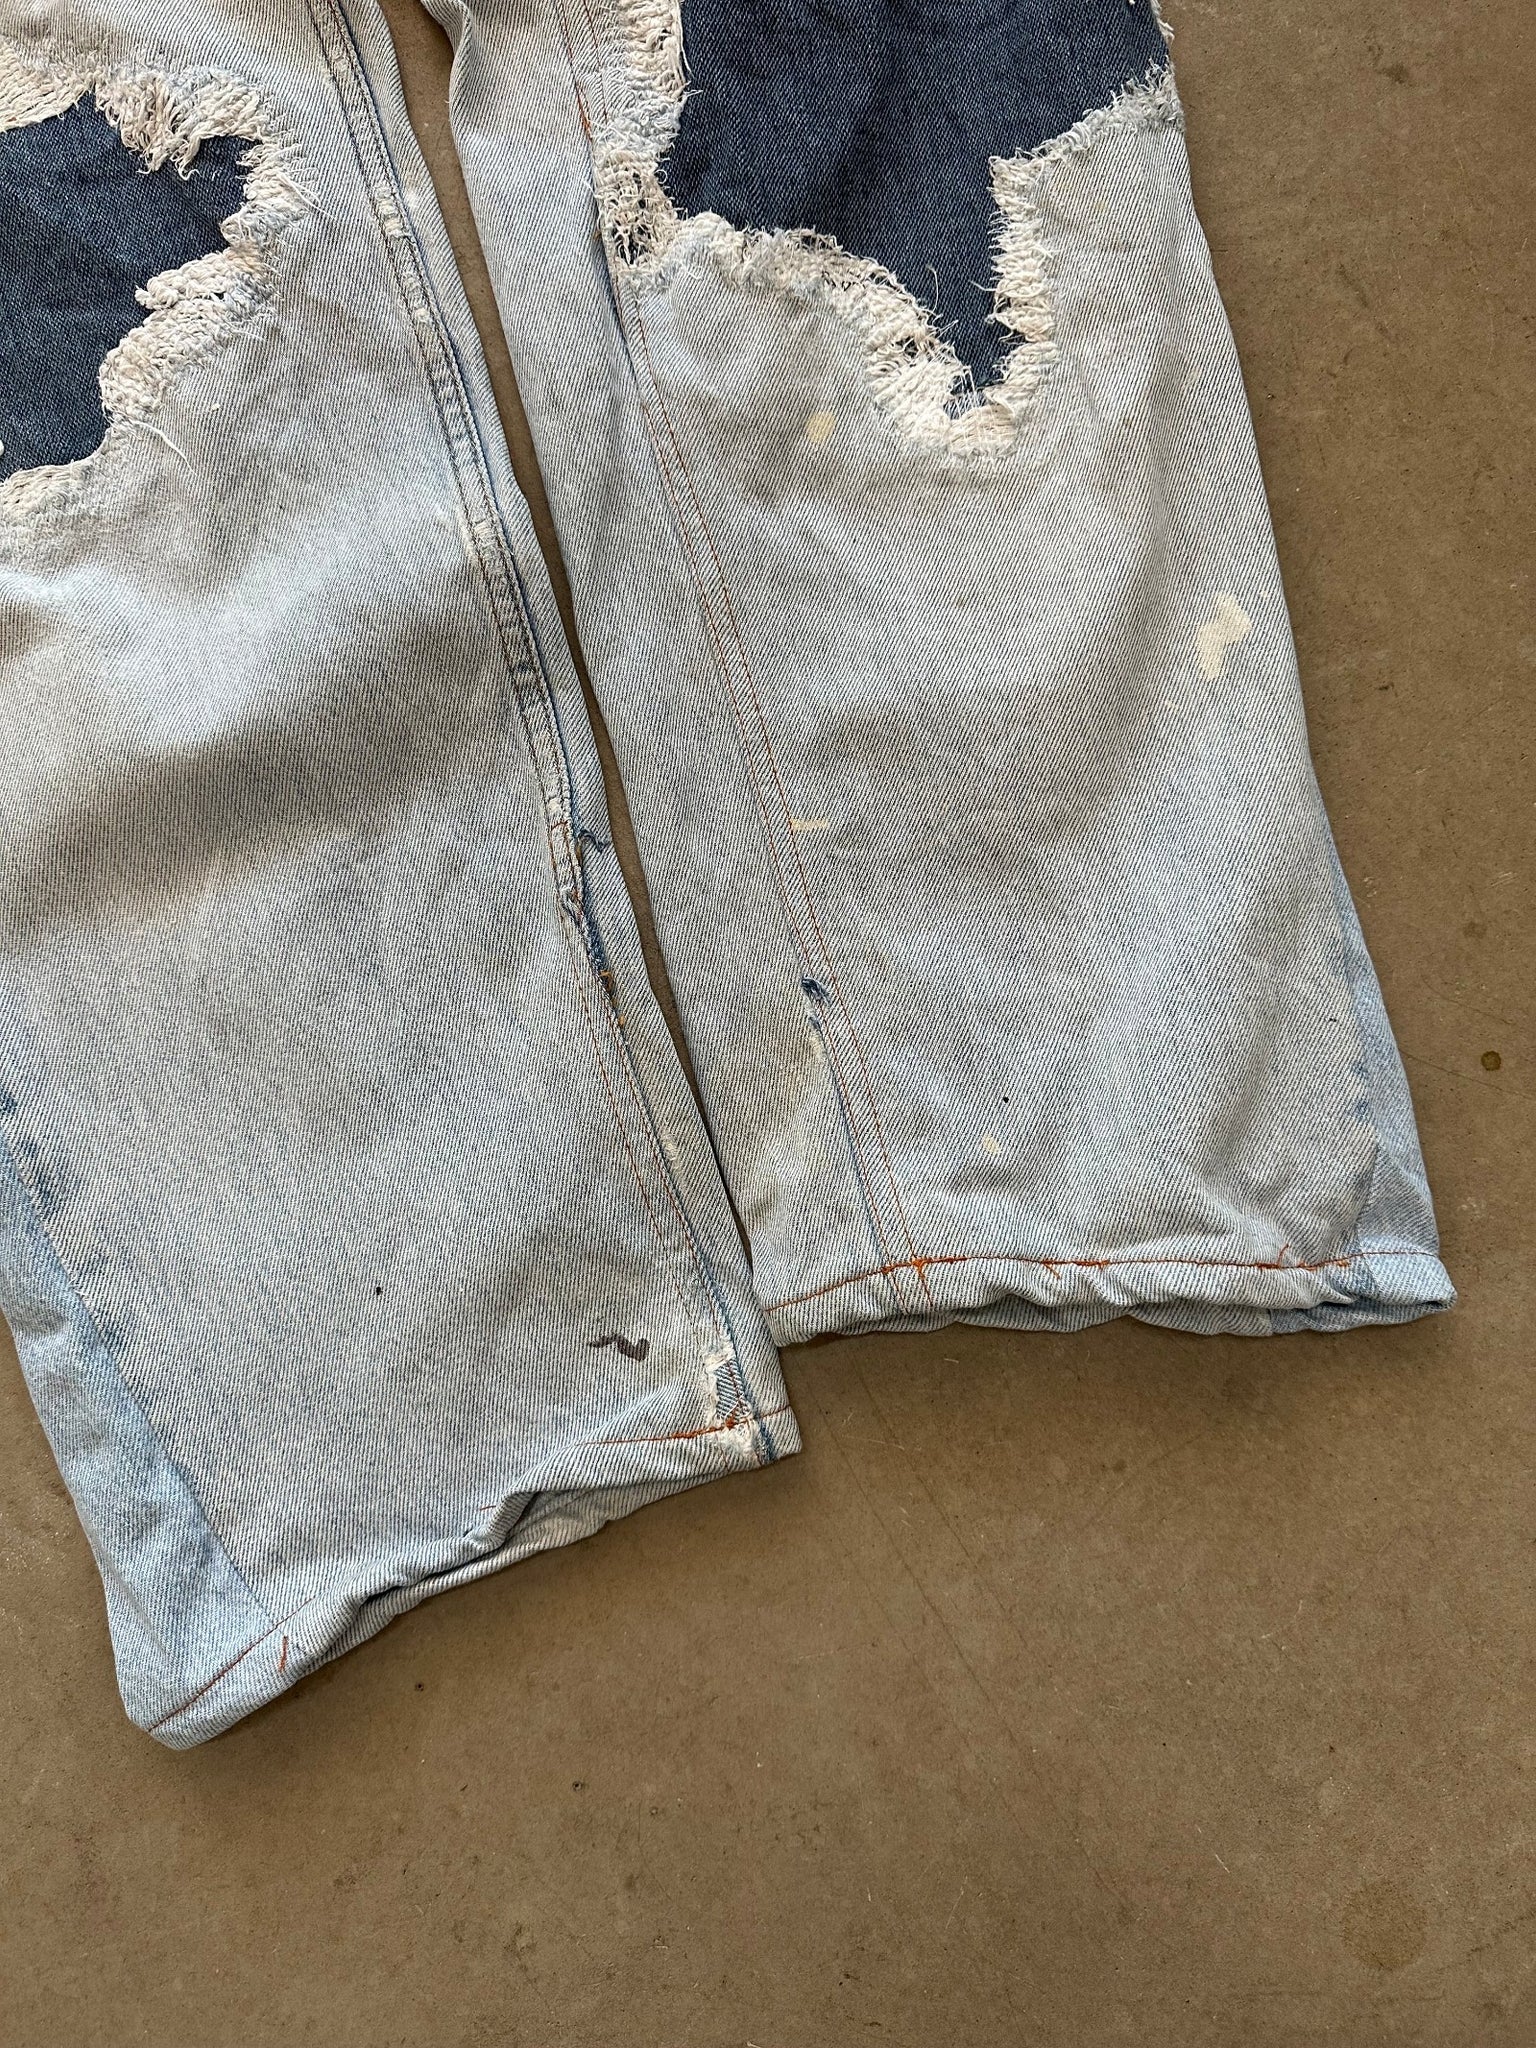 1990's Levi's 560 Repaired Jeans - 31 x 32